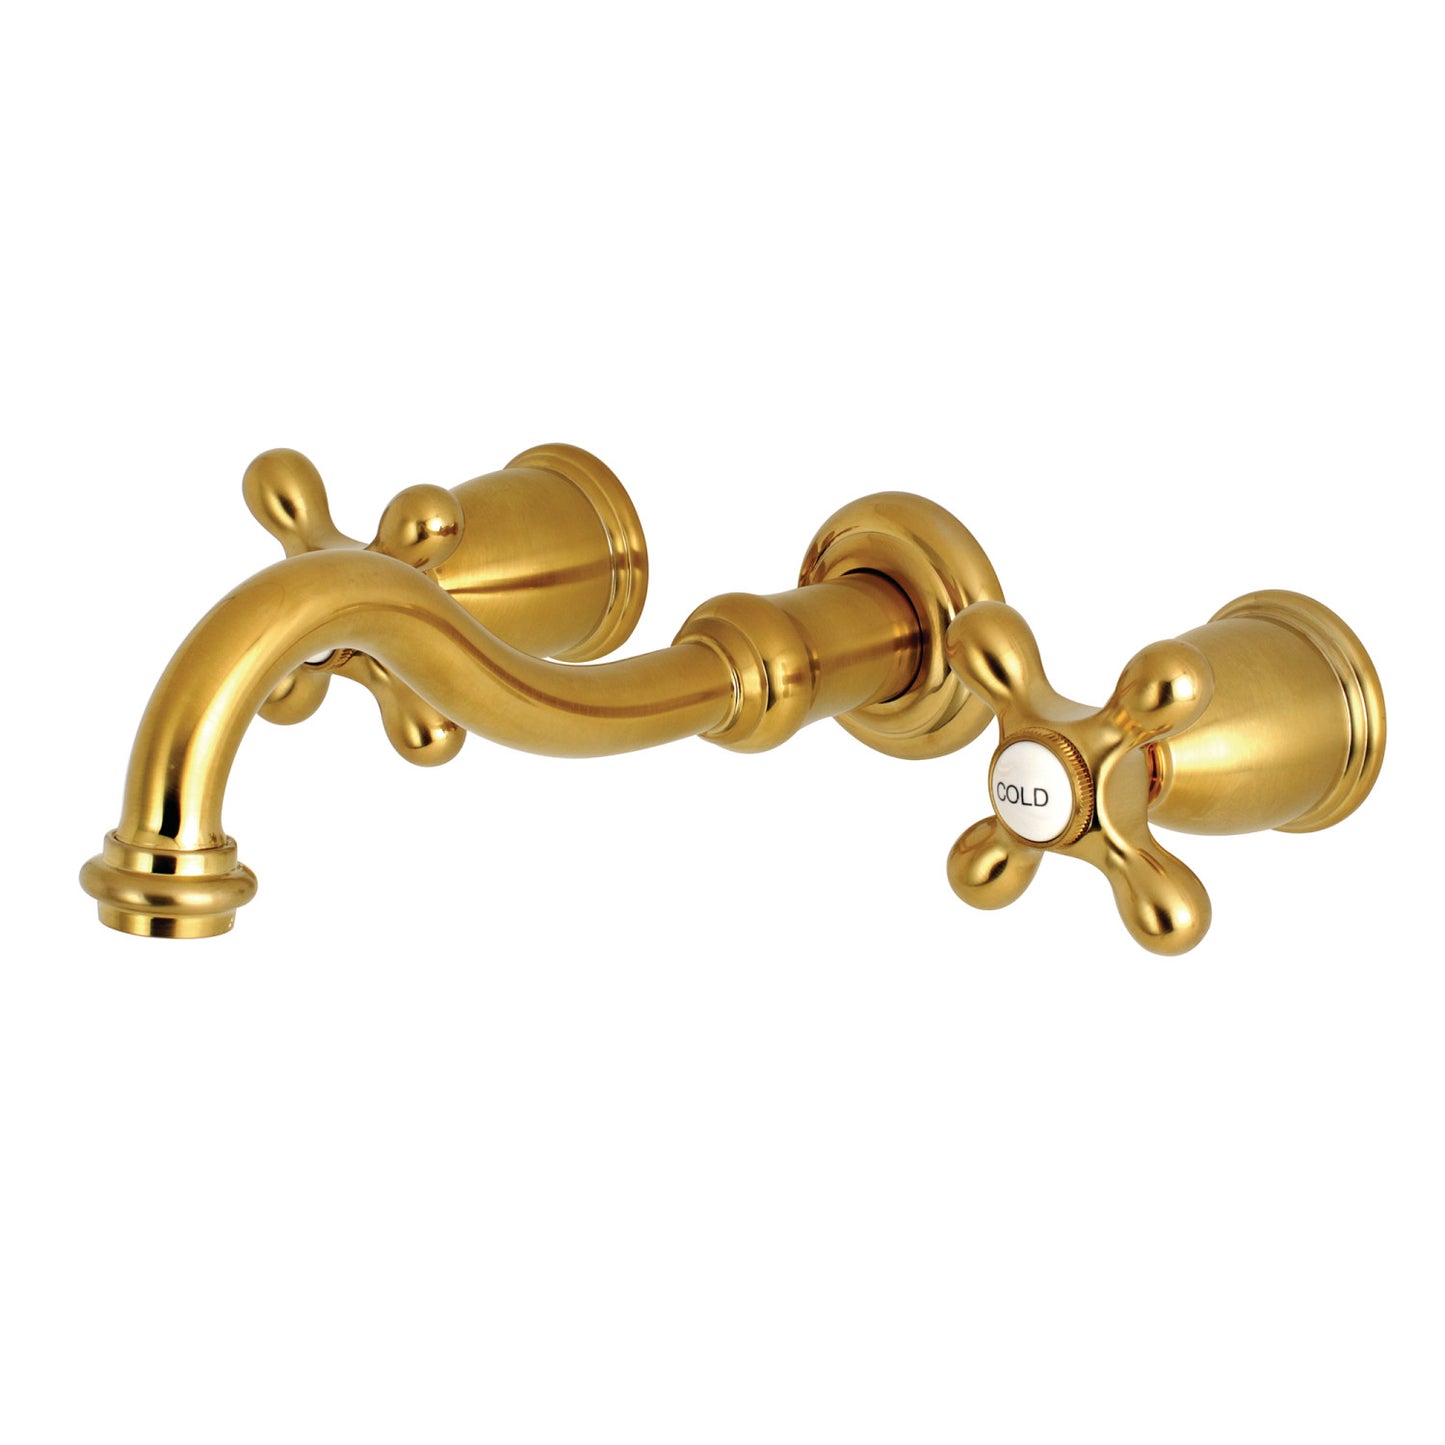 Vintage 8-Inch Wall Mount Sink Faucet with Cross Handle, Satin Brass